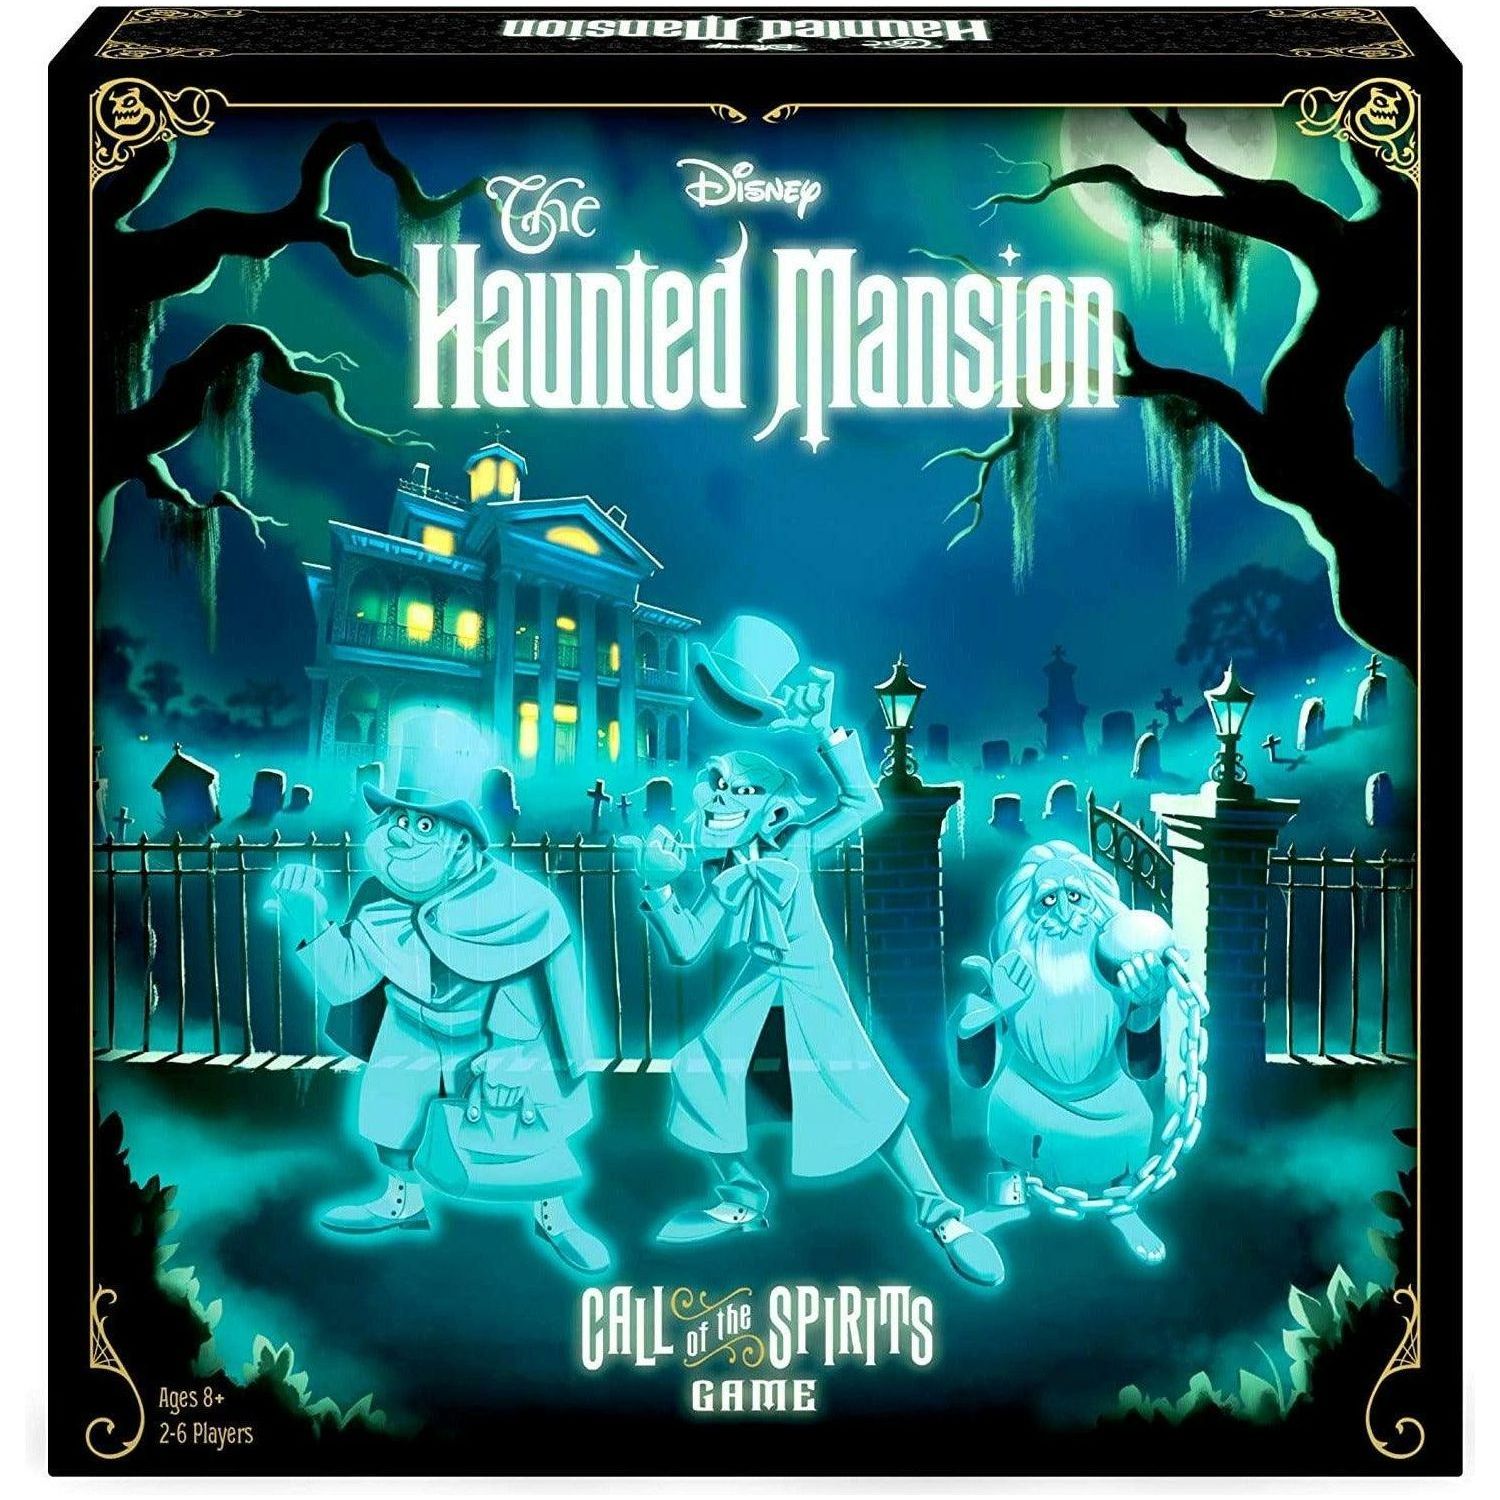 Funko Pop Disney The Haunted Mansion - Call of The Spirits: Disneyland Edition Game - BumbleToys - 18+, Action Figures, Boys, Darth Vader, Funko, OXE, Pre-Order, star wars